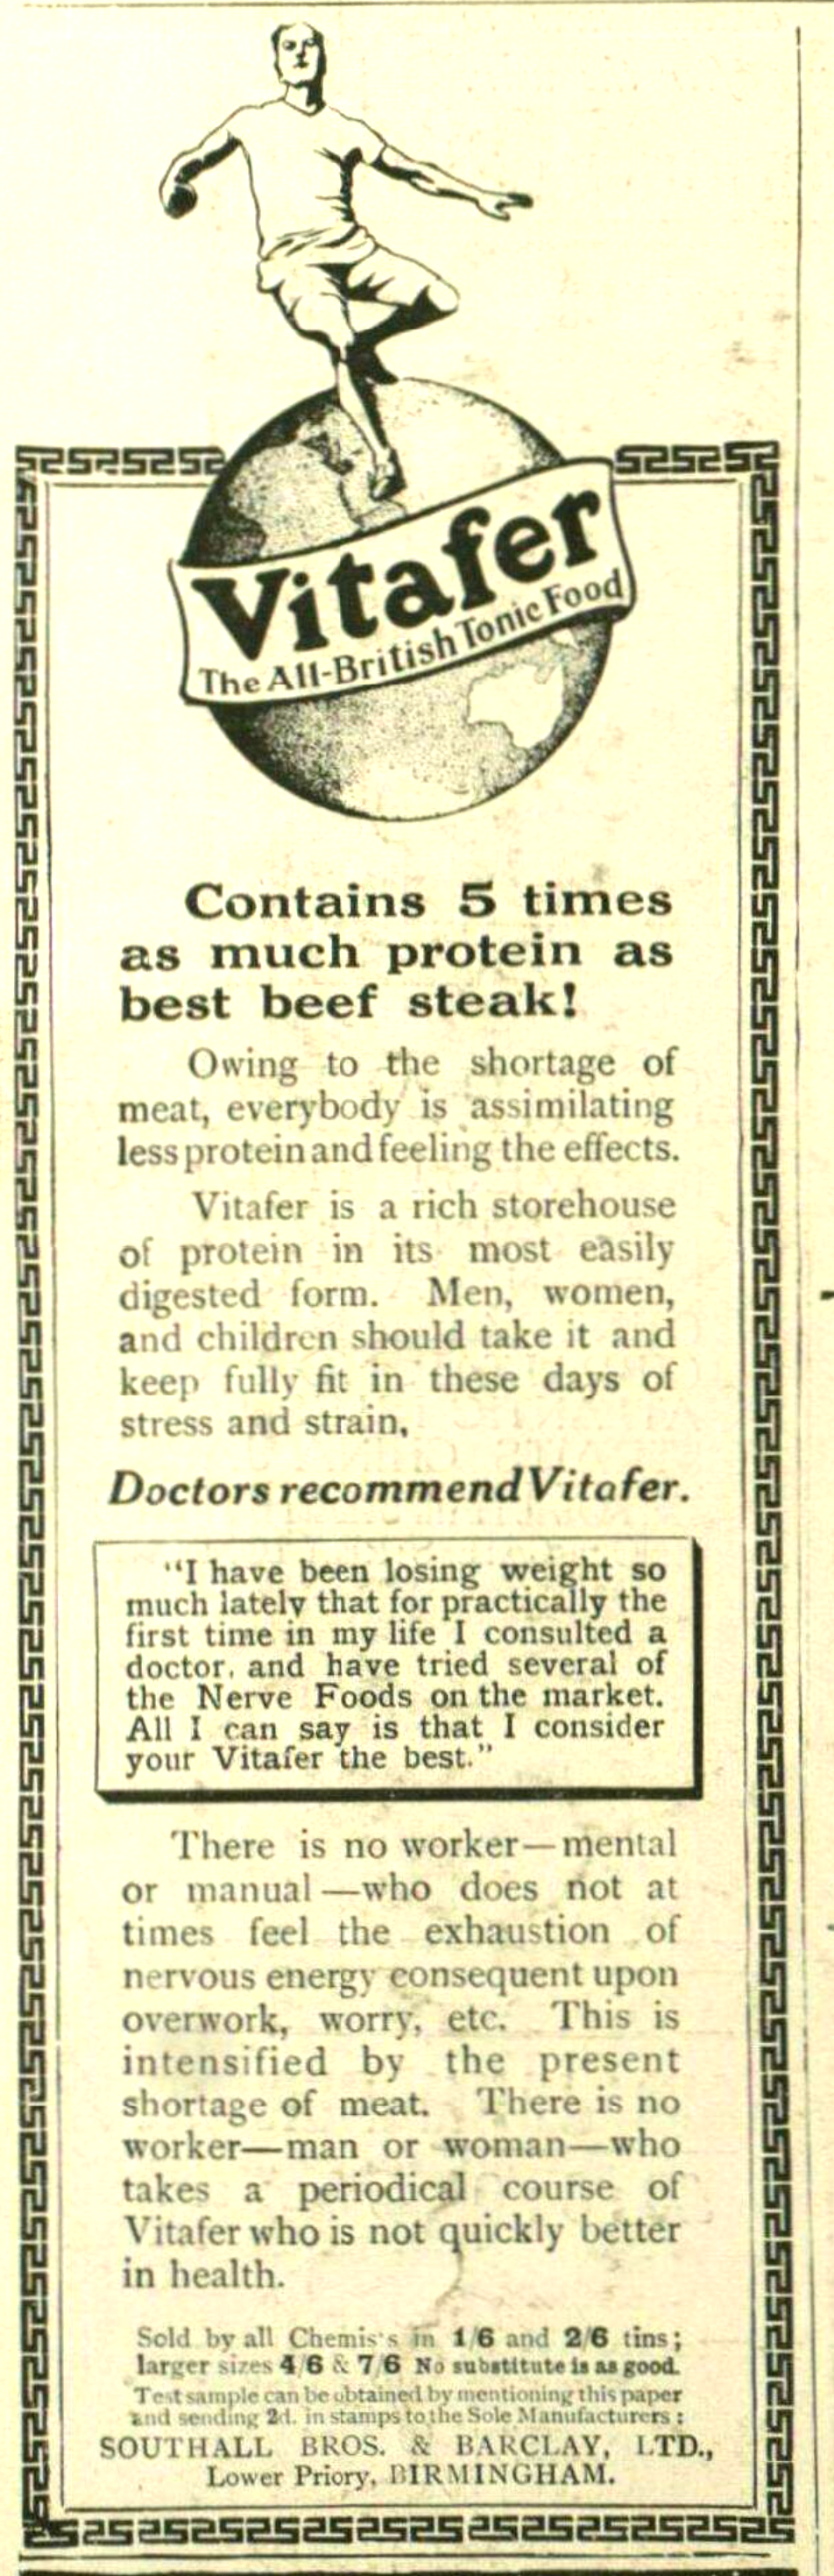 1918 advert for "Vitafer", stating "Contains 5 times as much protein as best beef steak!"